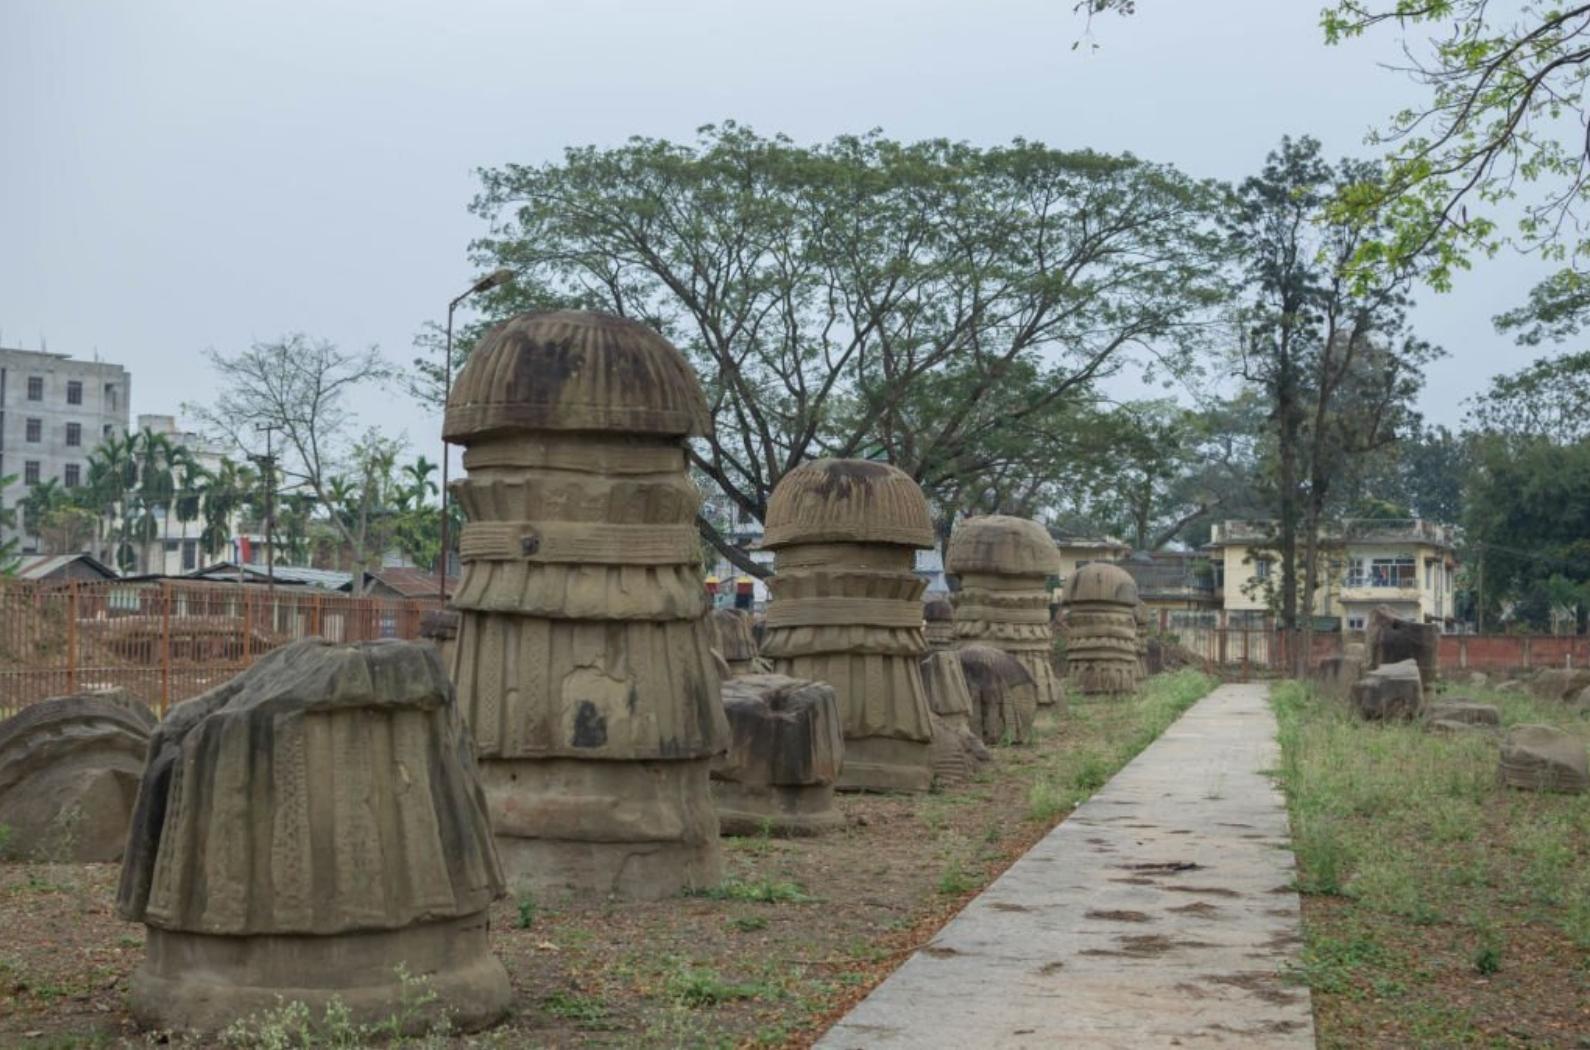 The domed stone pillars at the ancient Kachari ruins at the archaeological site in Dimapur in Nagaland.